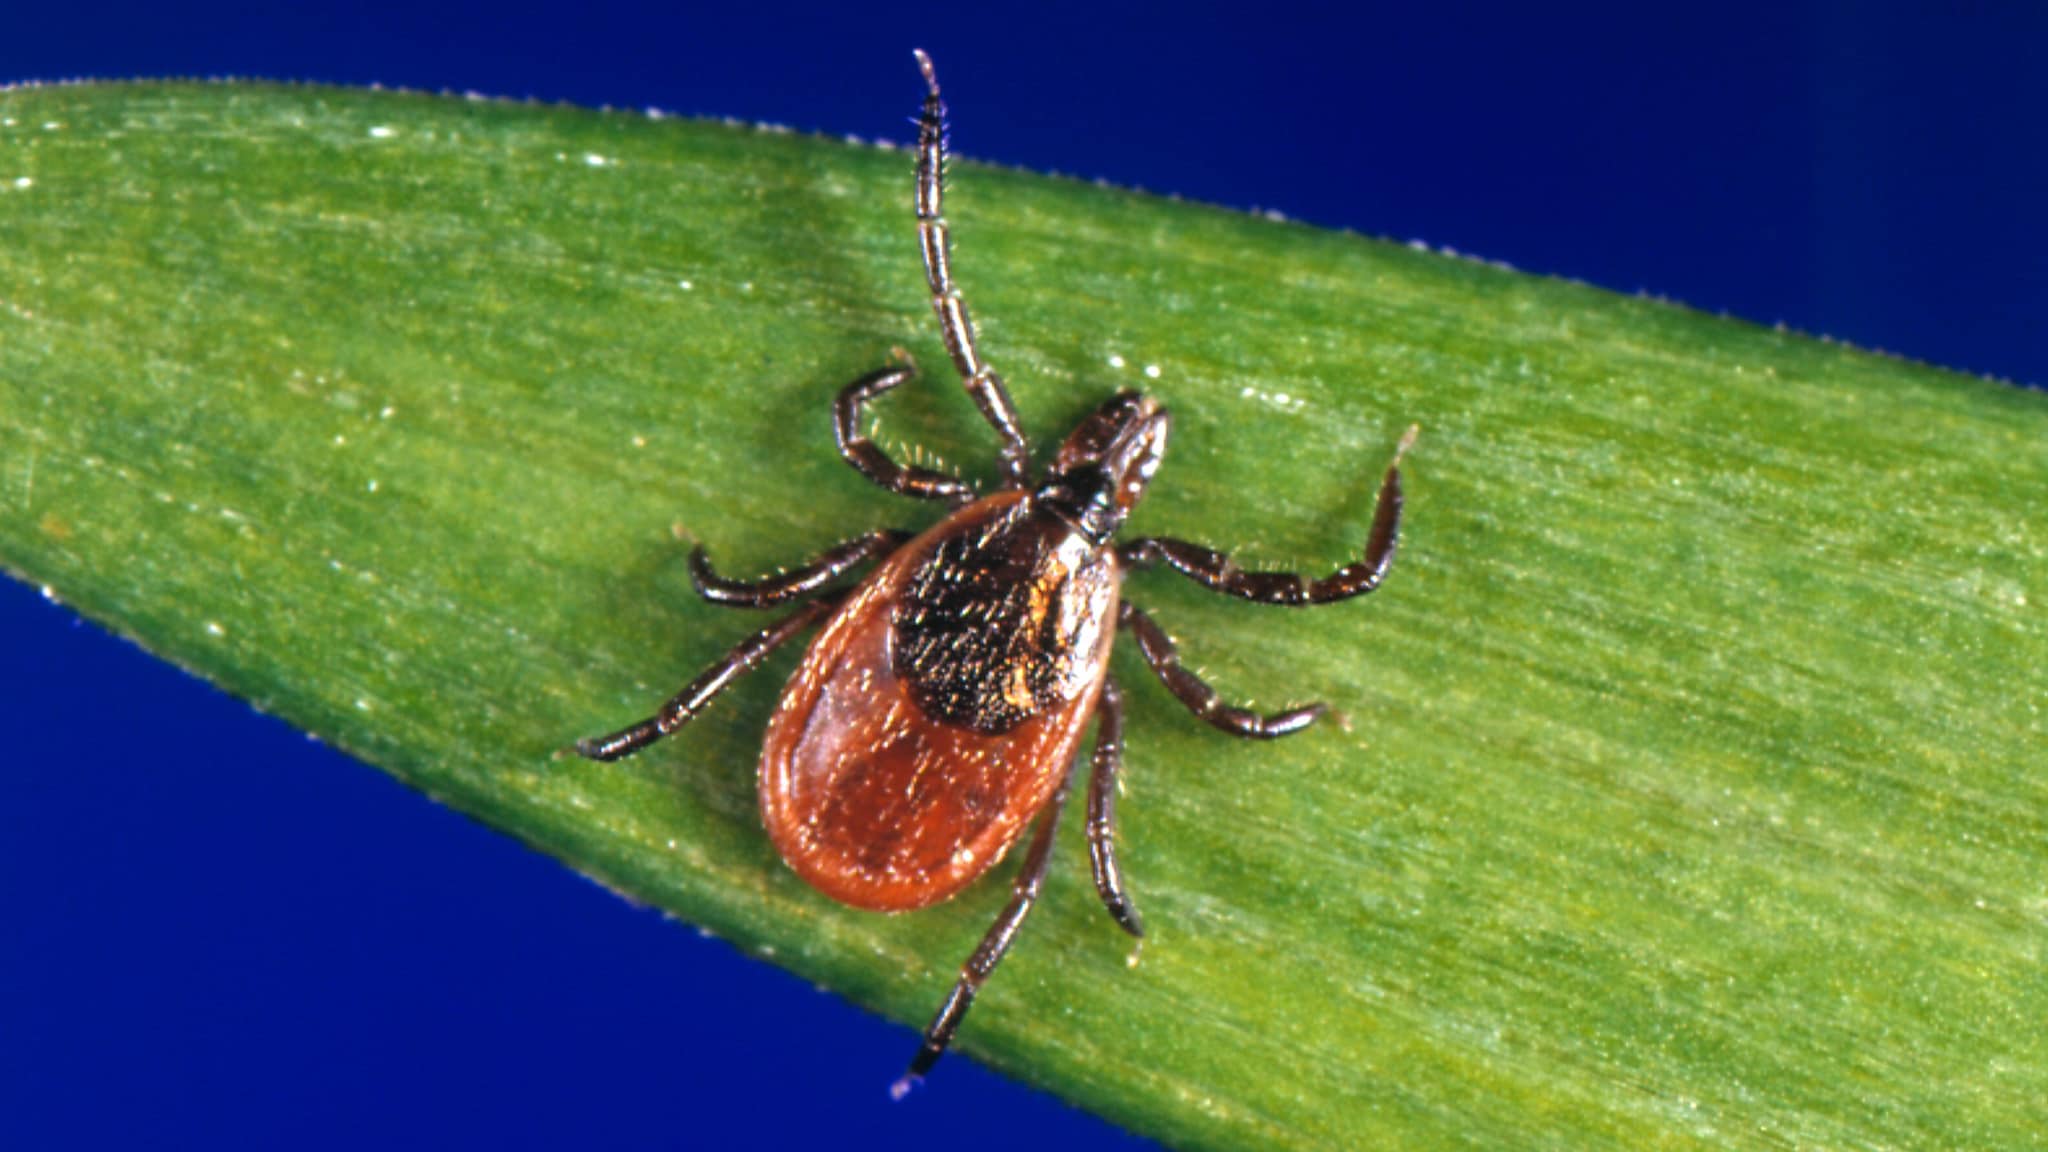 Ixodes scapularis tick on a blade of grass.